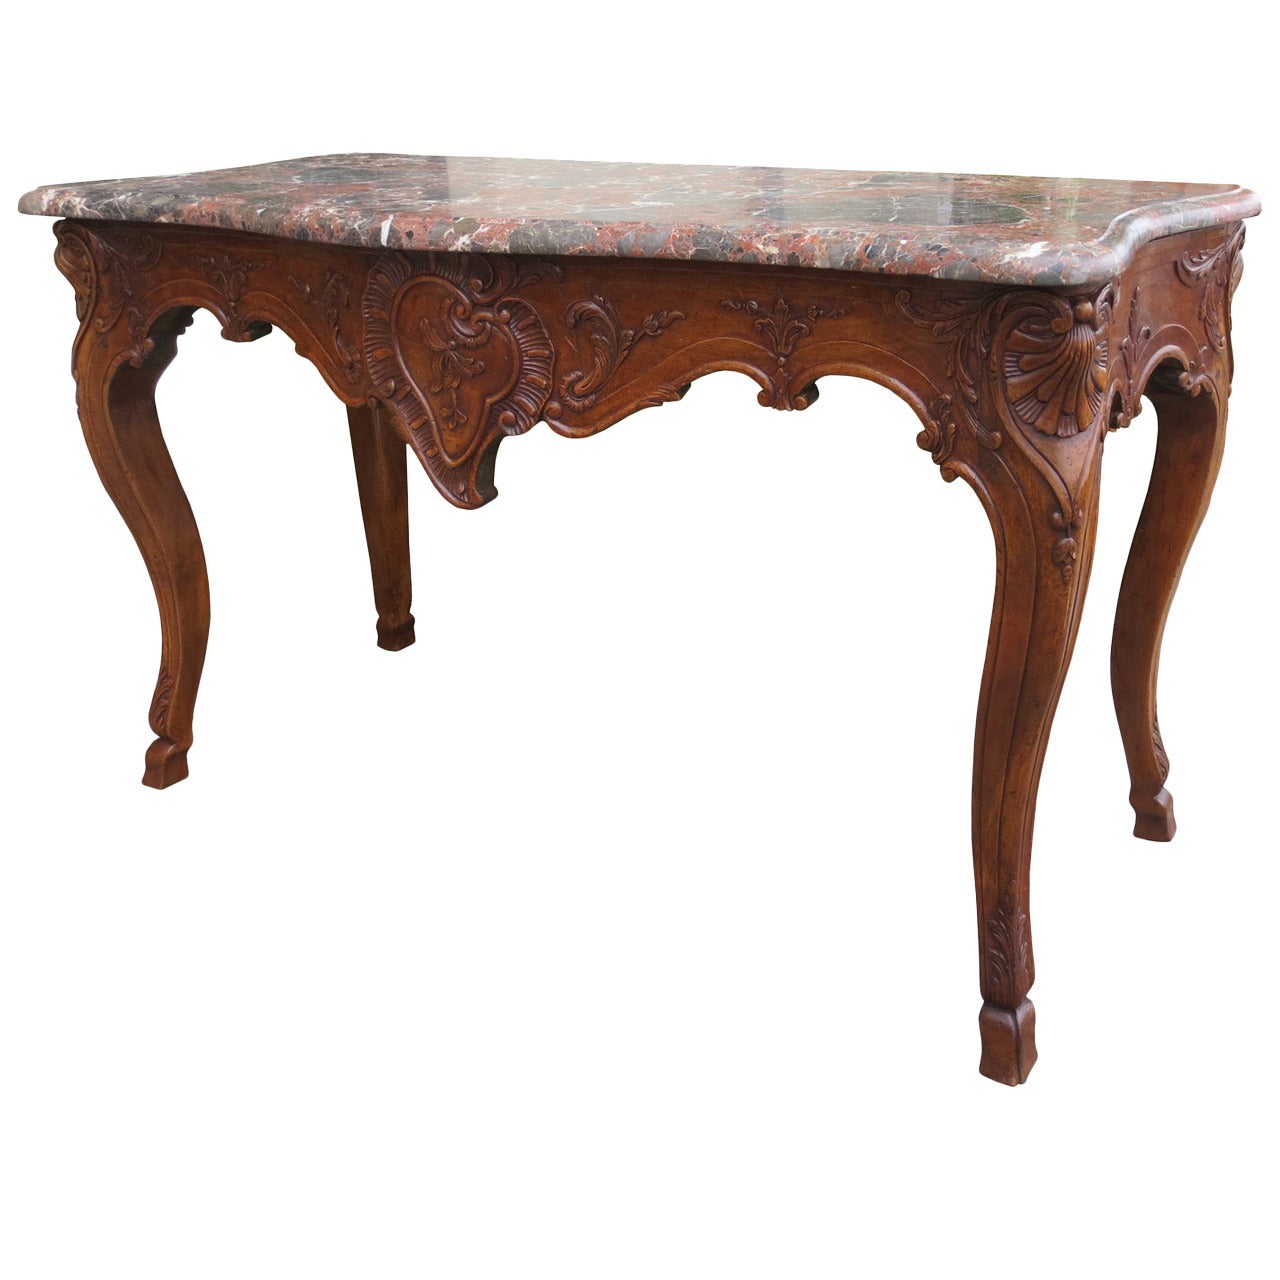 18th / 19th Century Regence Style Carved Walnut Marble Top Console